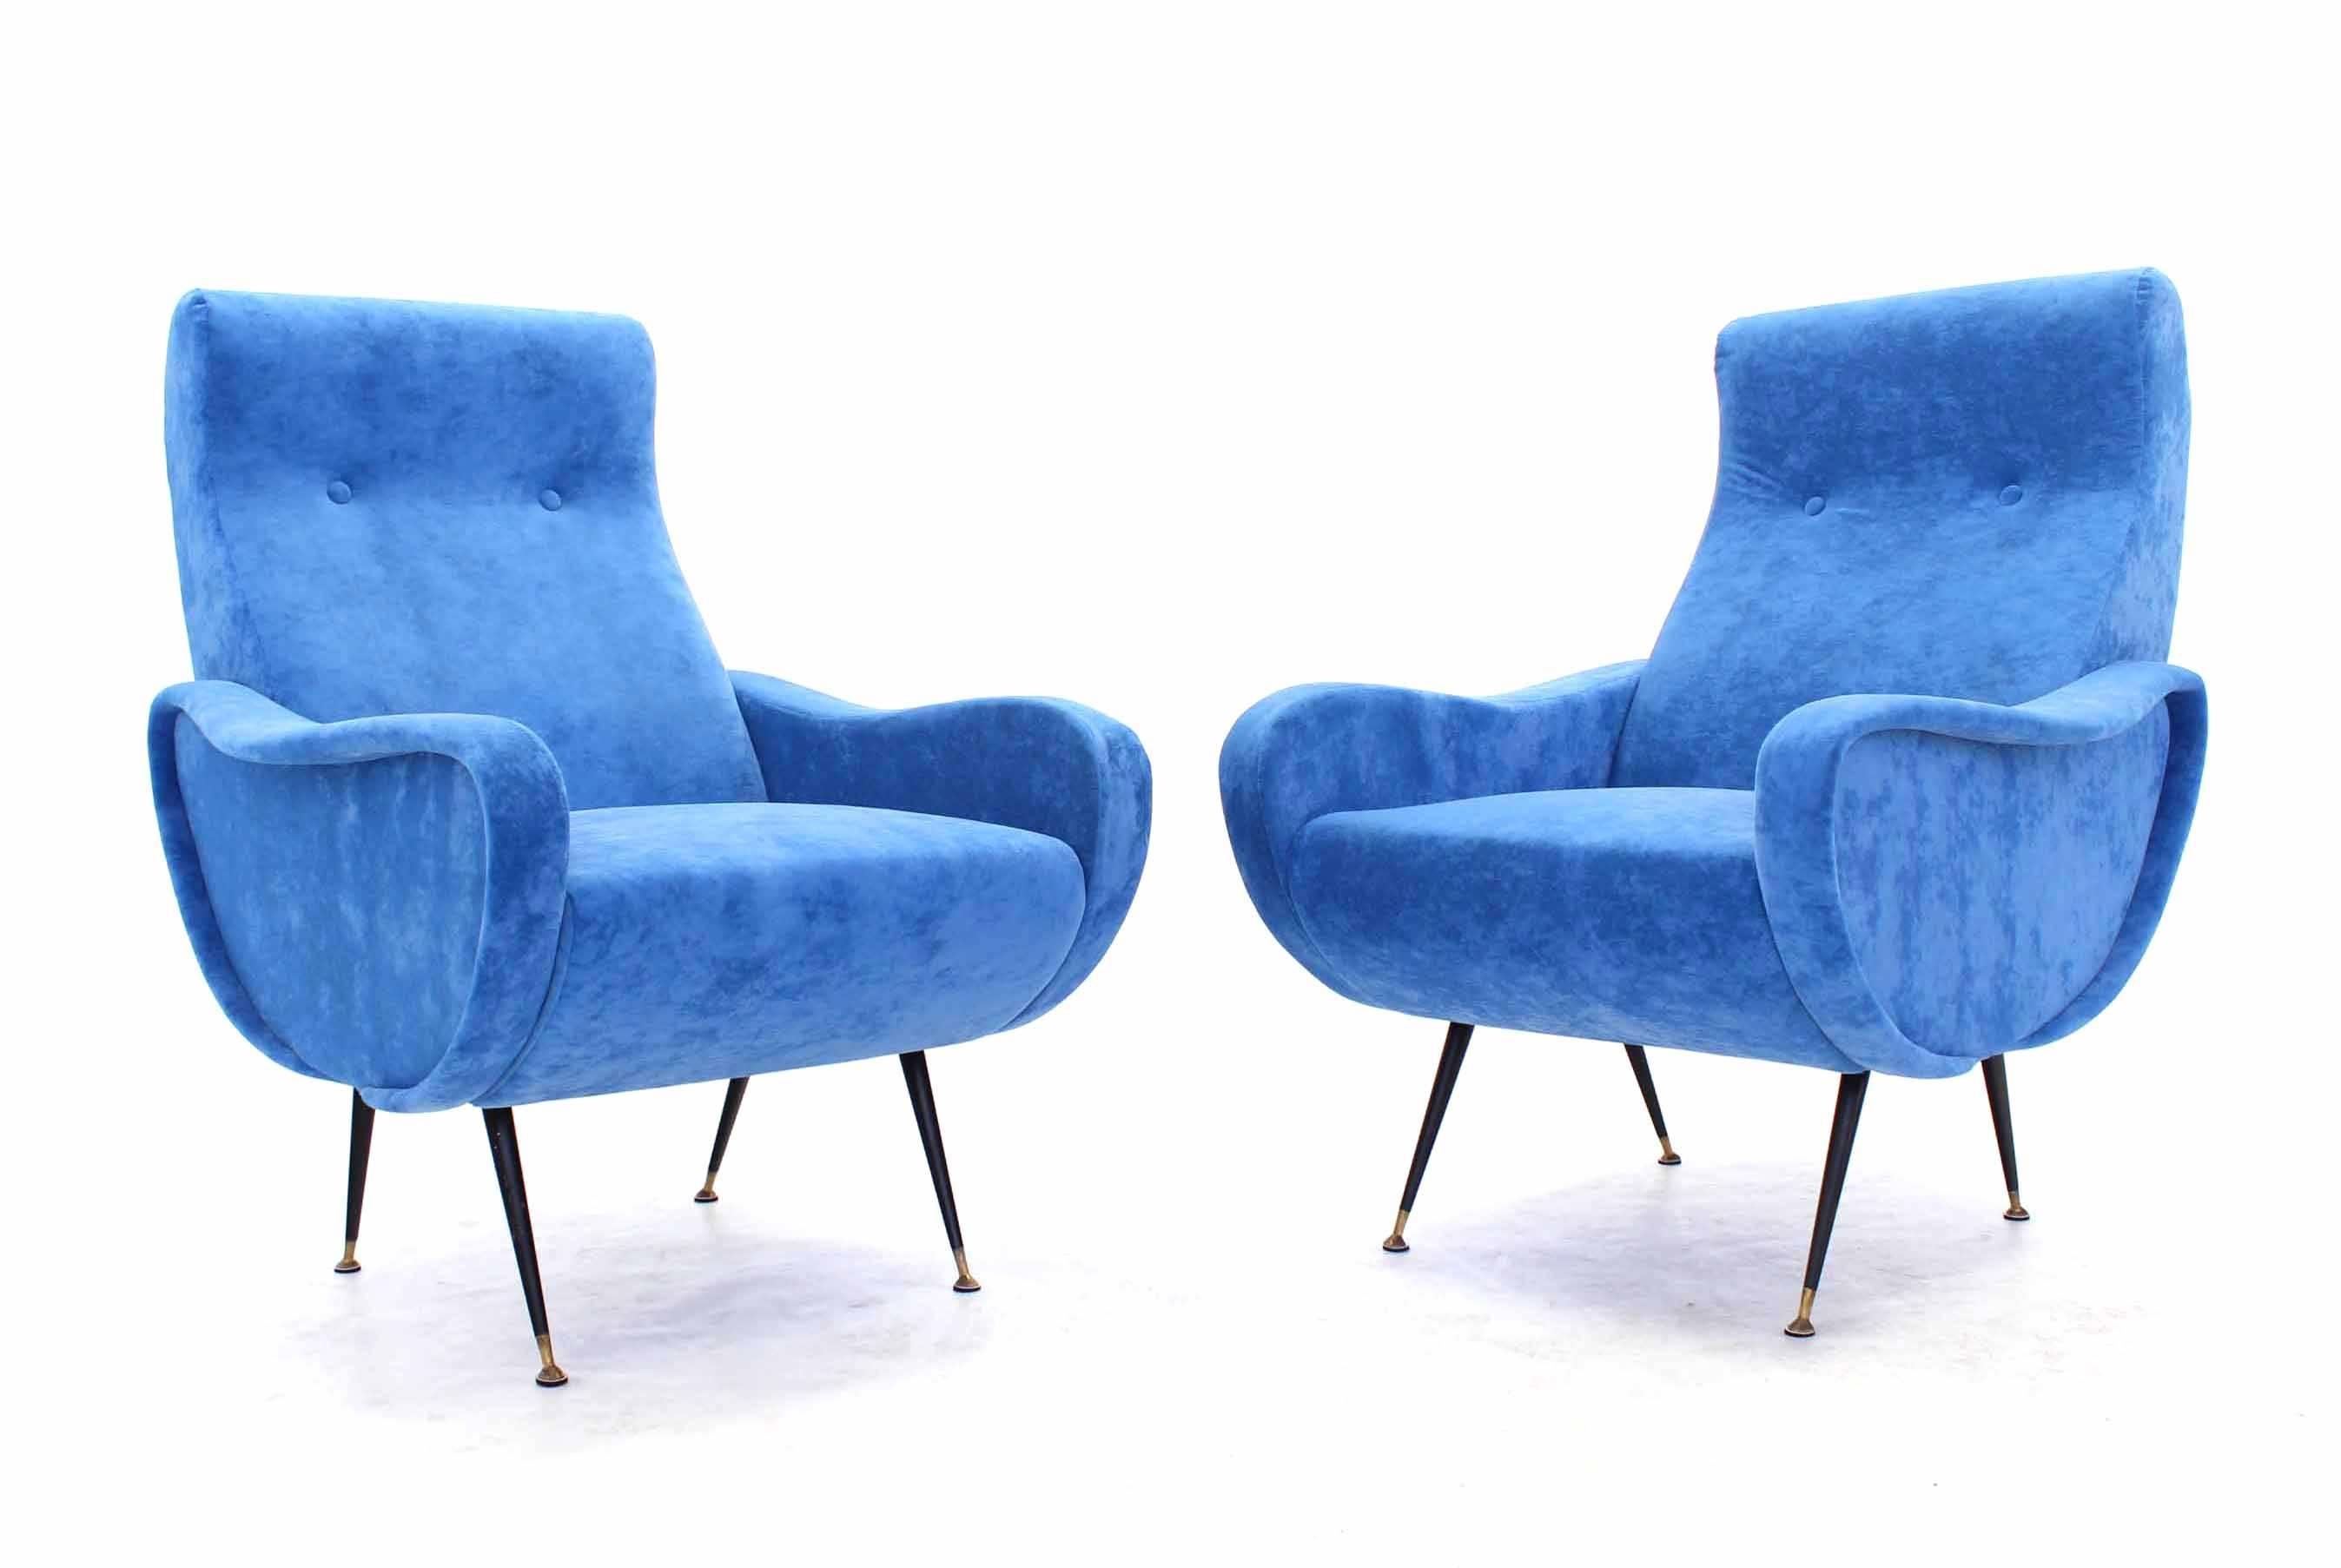 Pair of blue upholstery Marco Zanuso chairs.